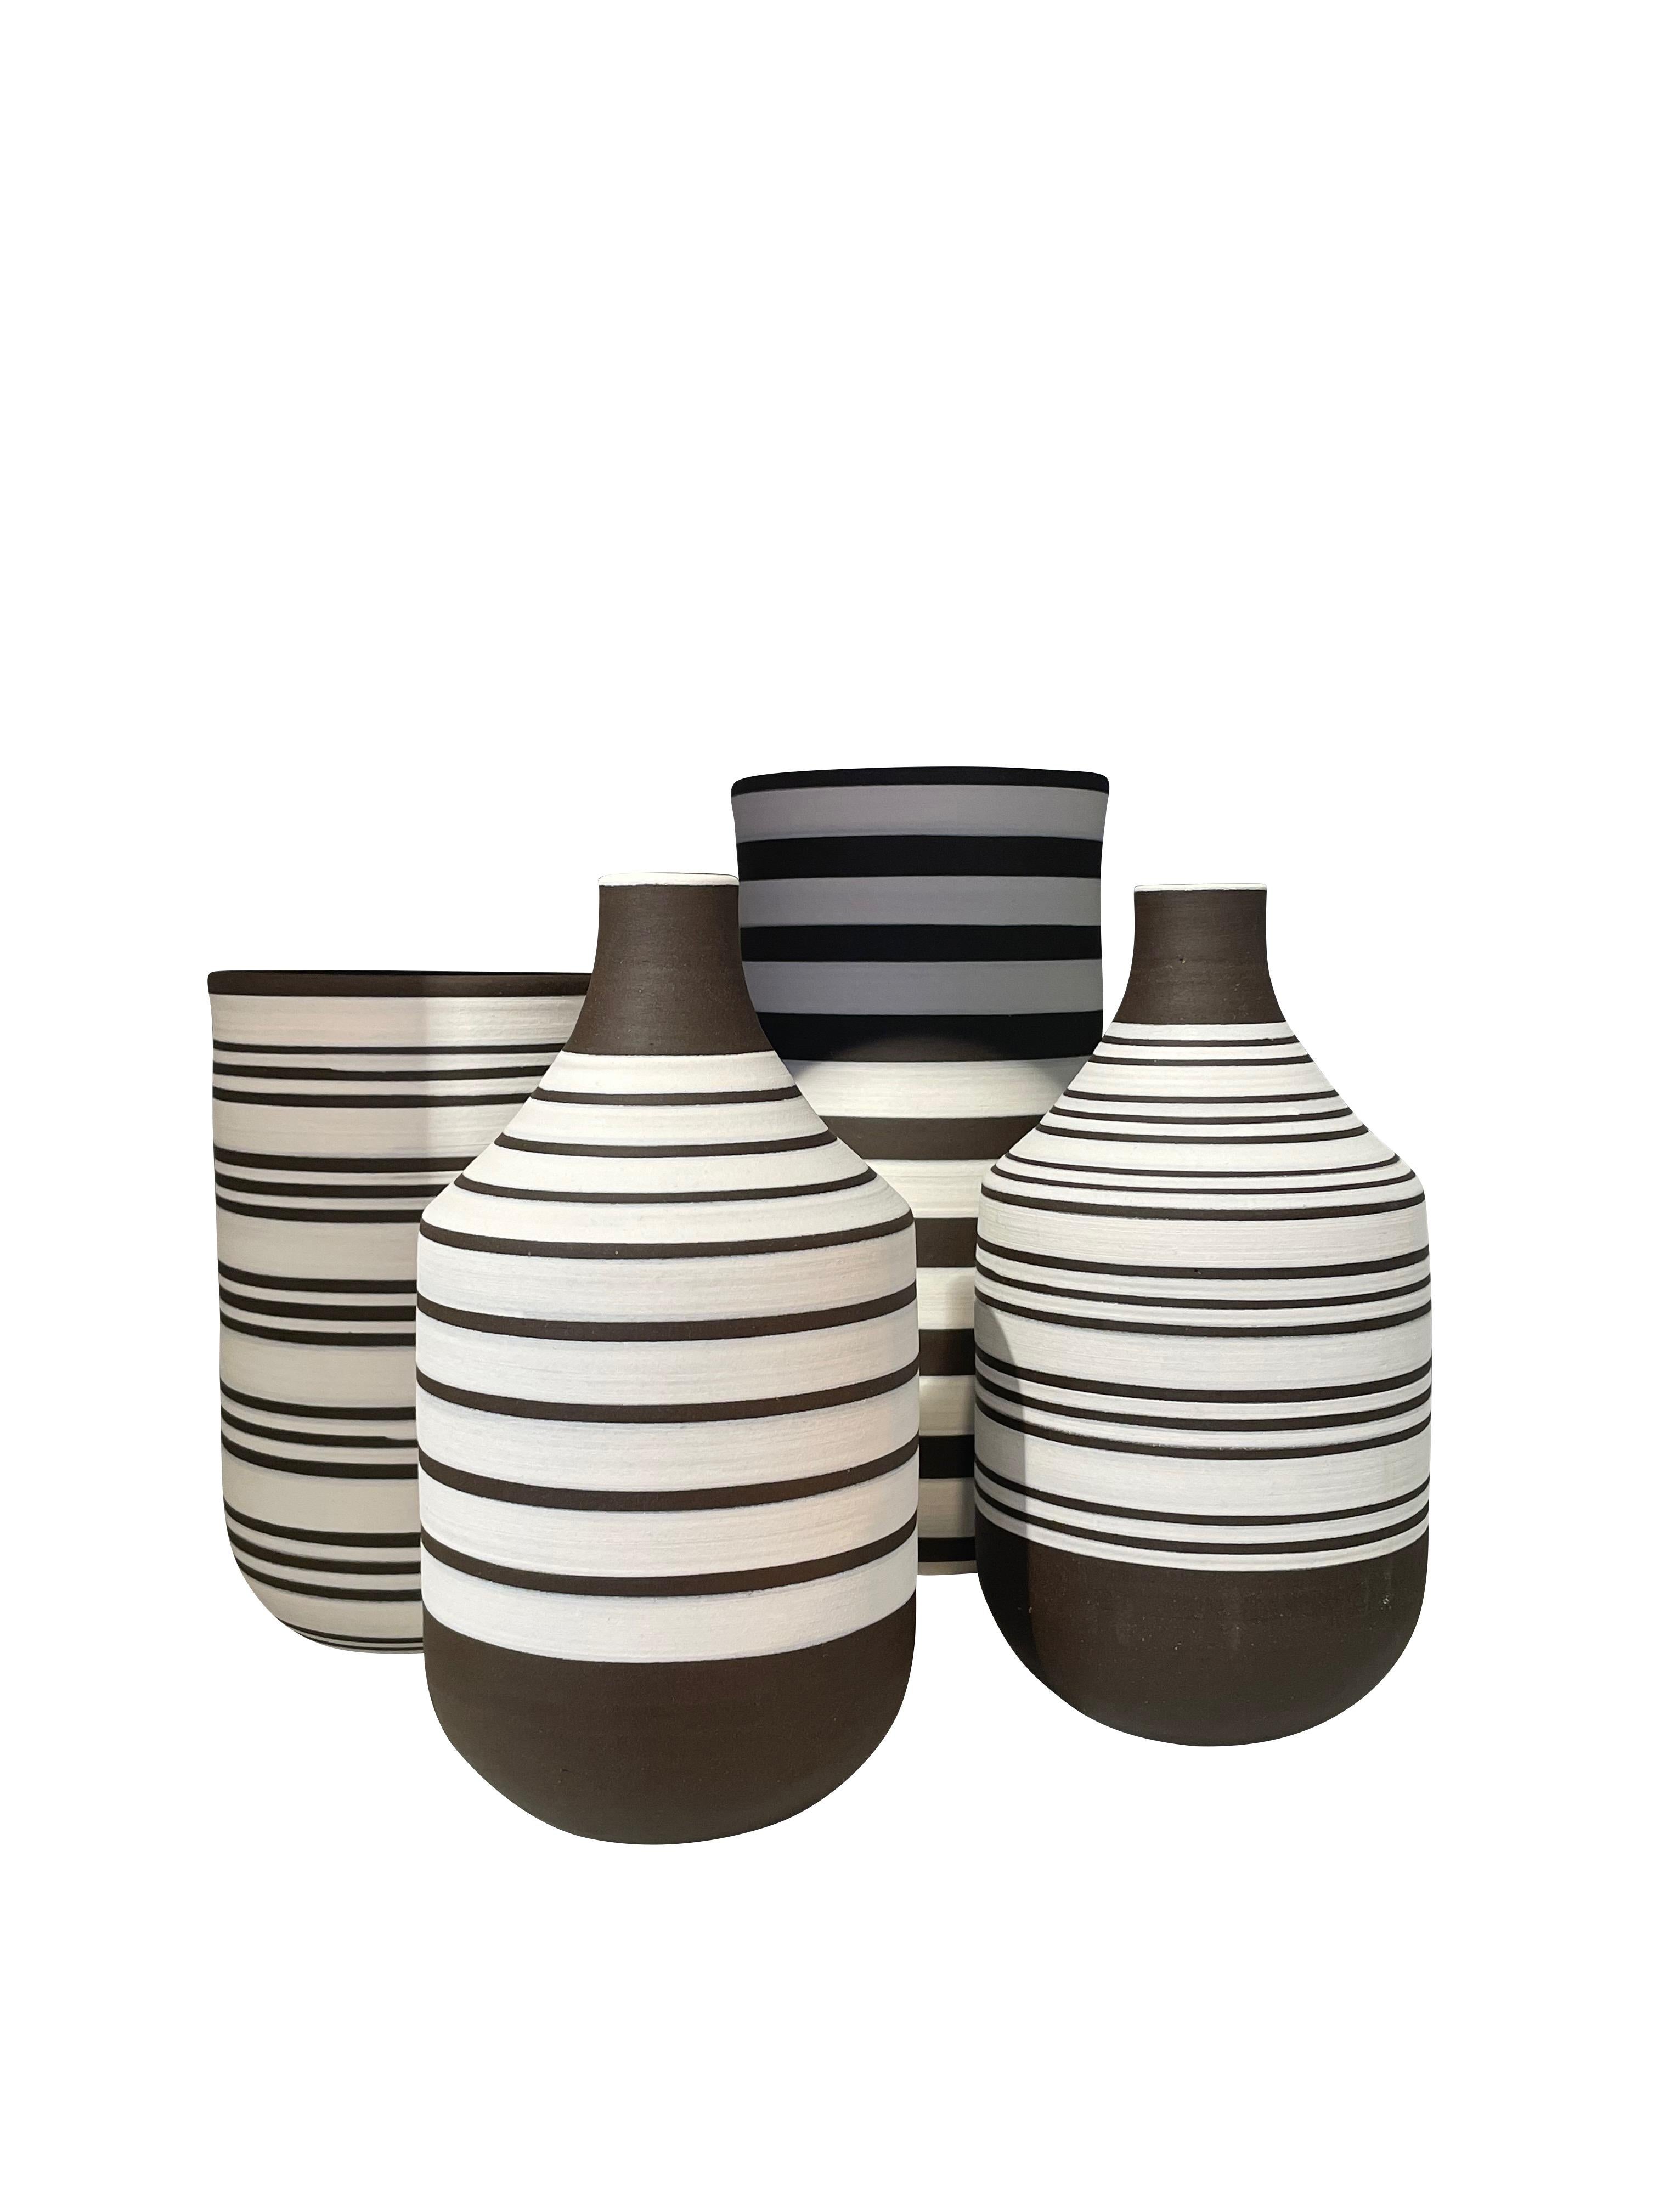 White With Dark Brown Stripes Vase, Turkey, Contemporary In New Condition For Sale In New York, NY